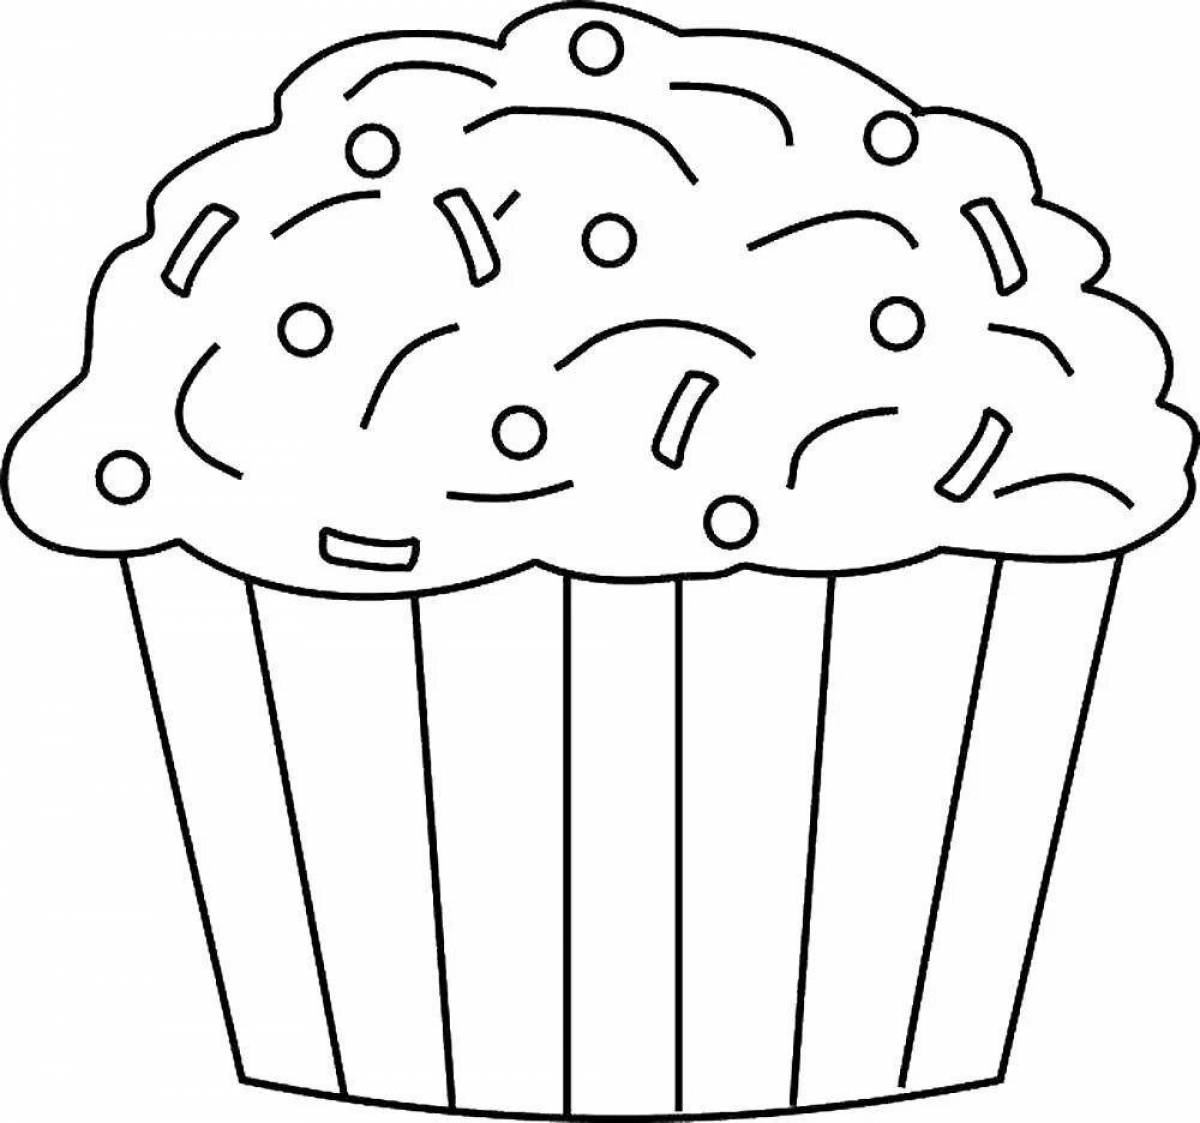 Cute cupcake coloring pages for kids